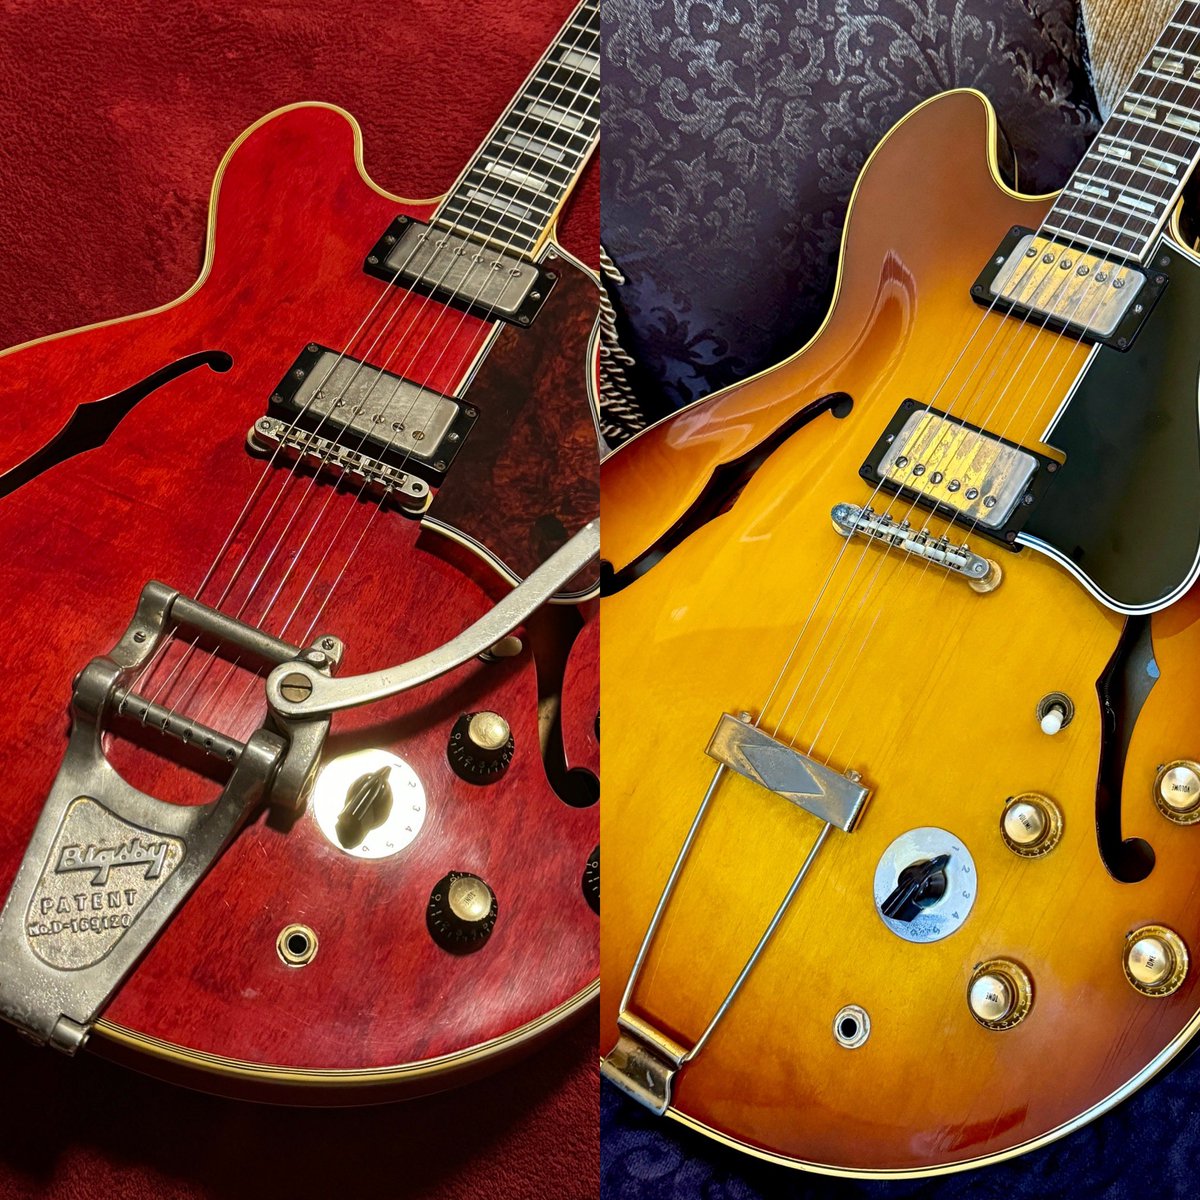 Being home means more time with my guitars. Which do you prefer?  Cherry or Ice Tea?? (‘60 ES 355 and ‘65 ES 345). Both featured on BK3 and cherry one a KISS era guitar!